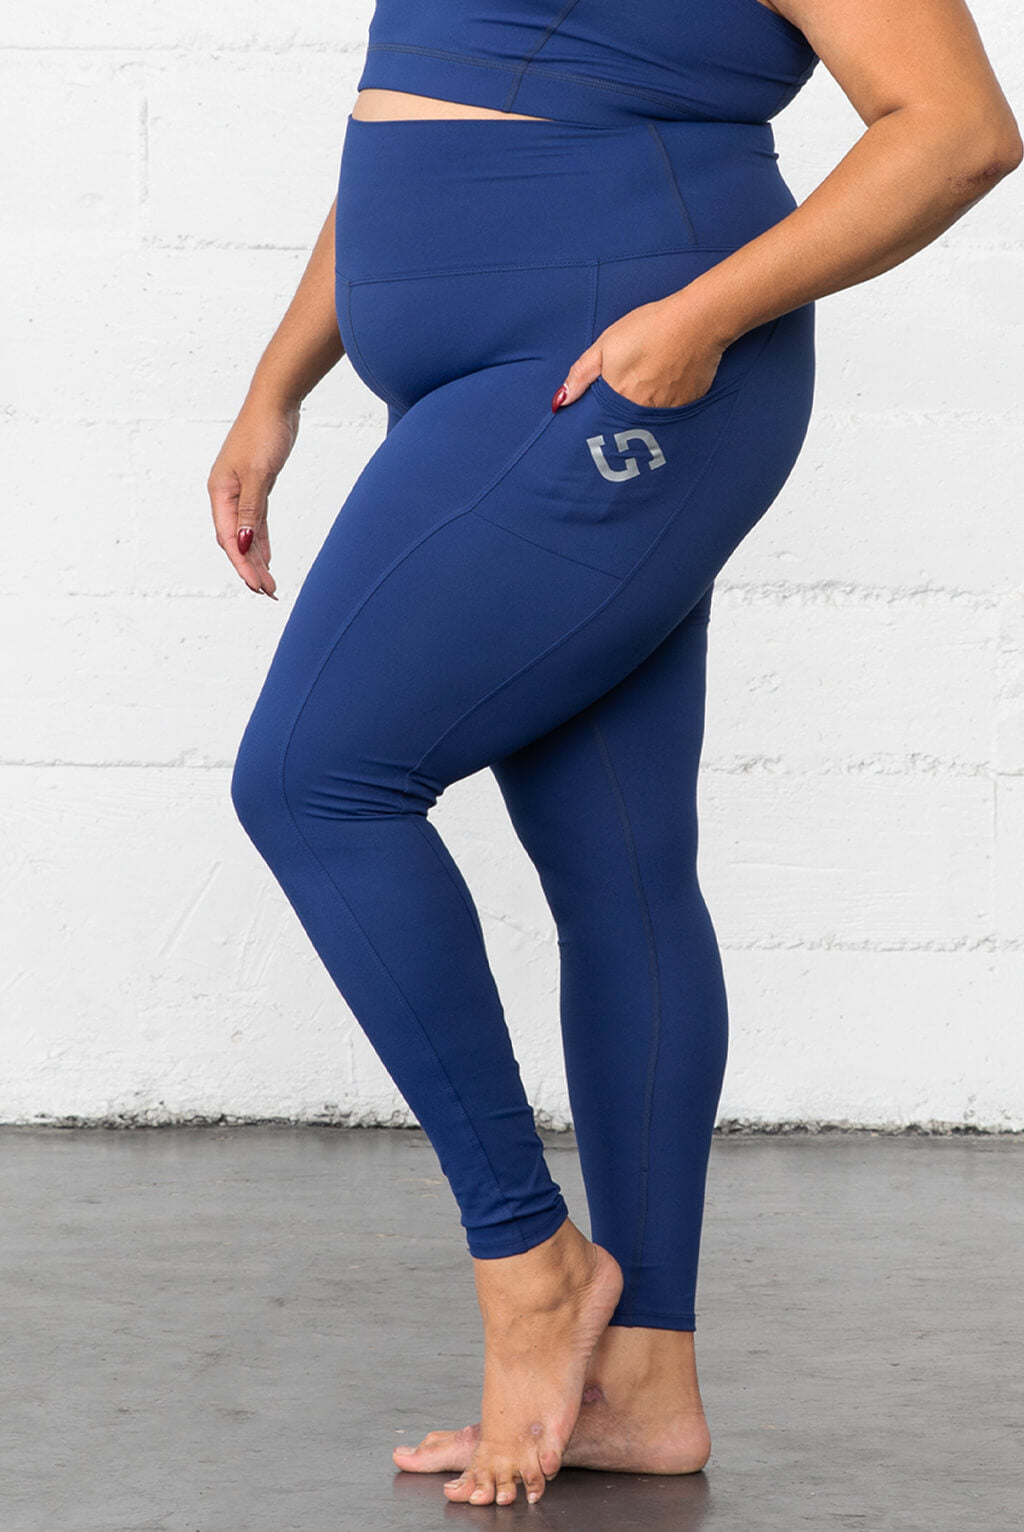 Maternity Oh! Mamma Legging Capris with Full Panel (Available in Plus Sizes)  - Walmart.com